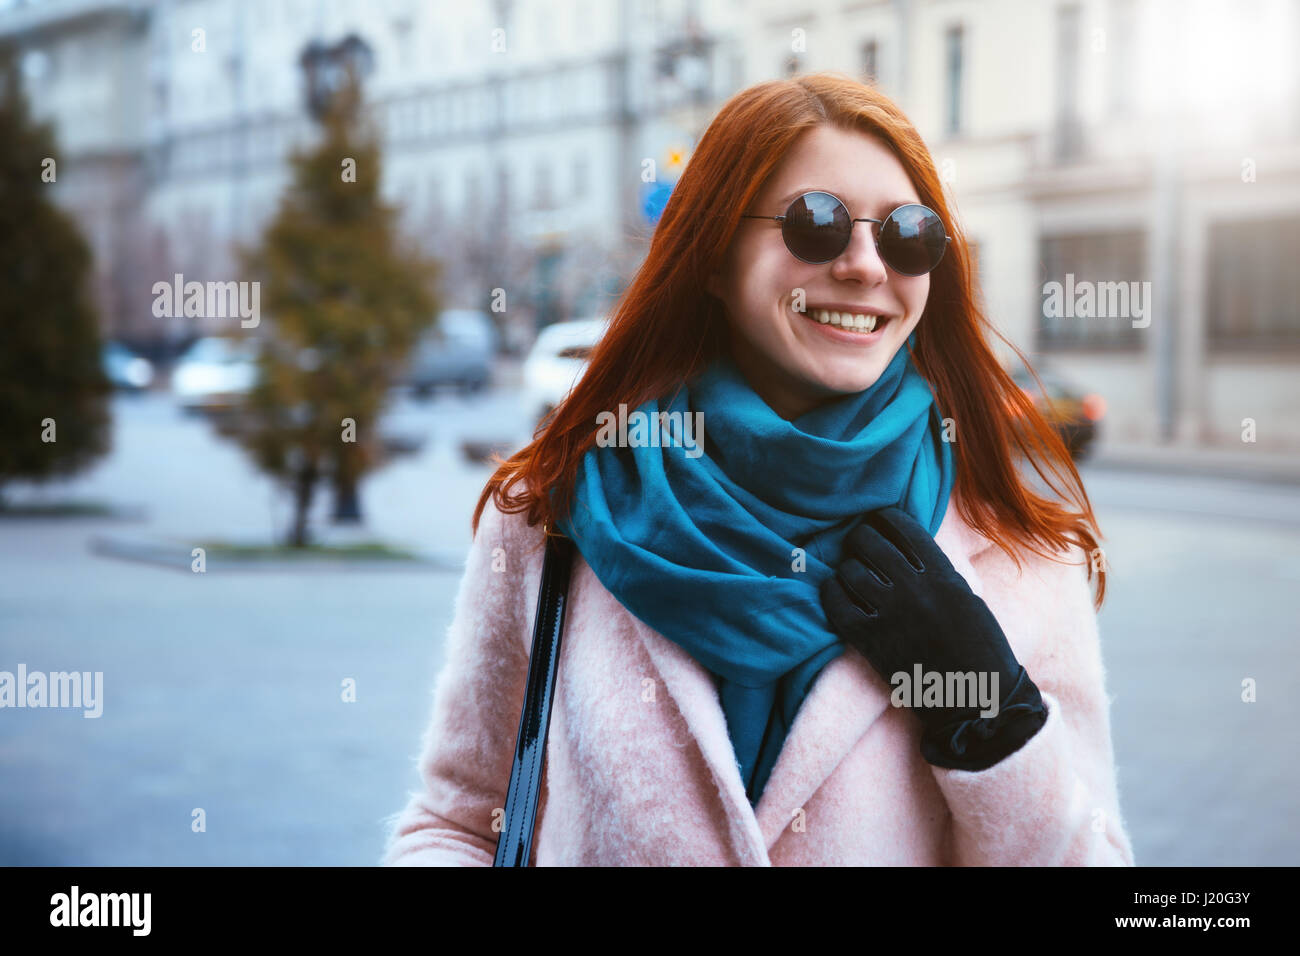 Red haired beautiful girl is walking in the urban background in a pink coat and blue scarf, with sunglasses. Stock Photo